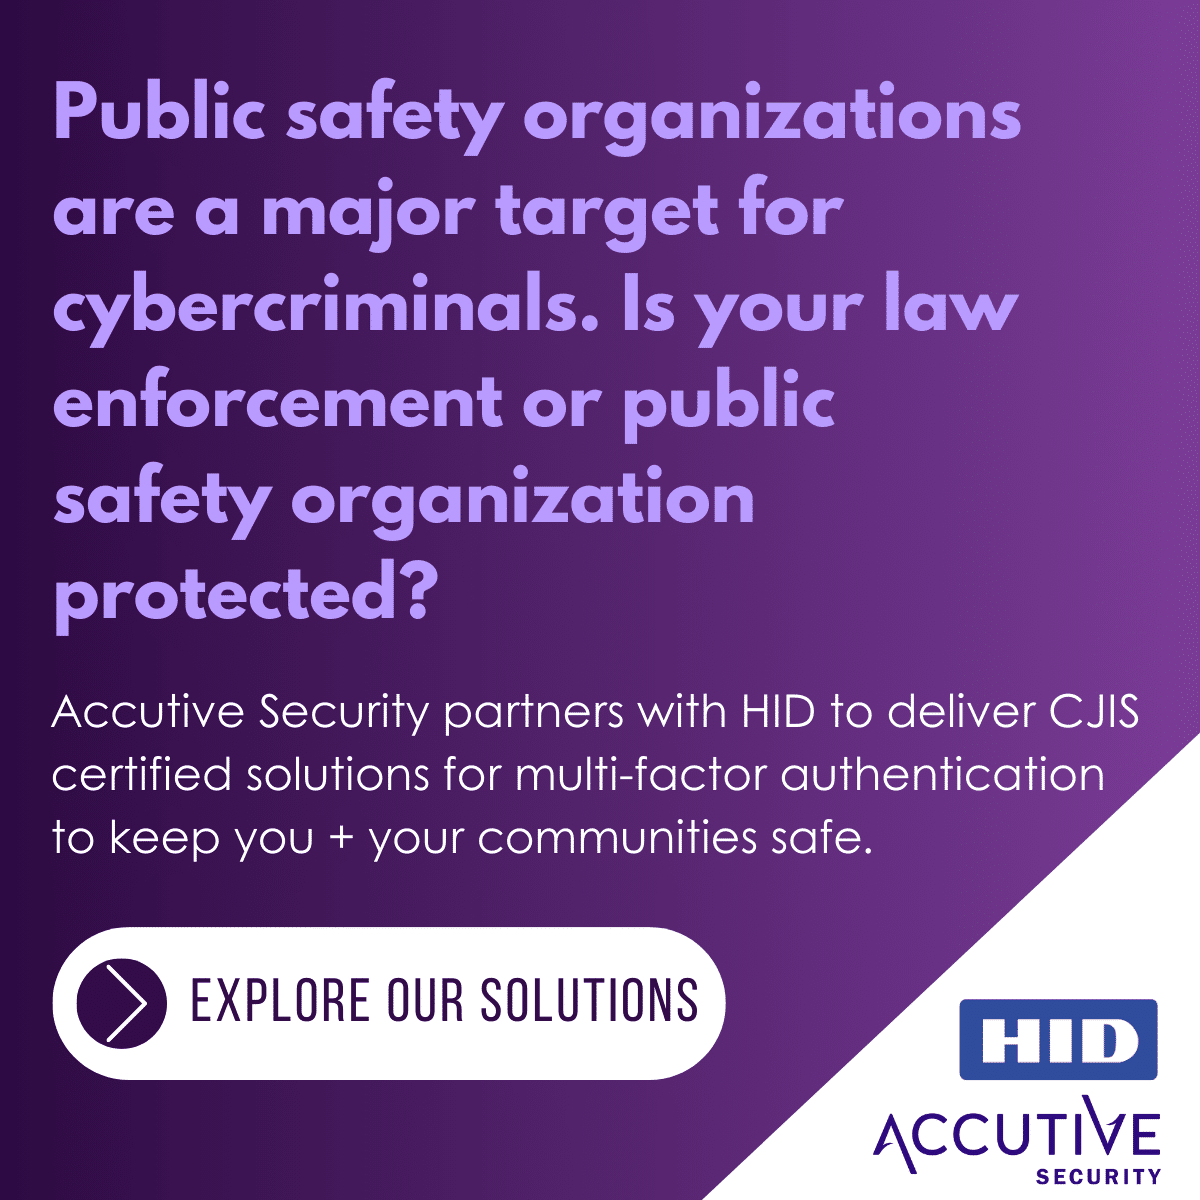 Accutive Security partners with HID to deliver DigitalPersona and other CJIS certified solutions for law enforcement